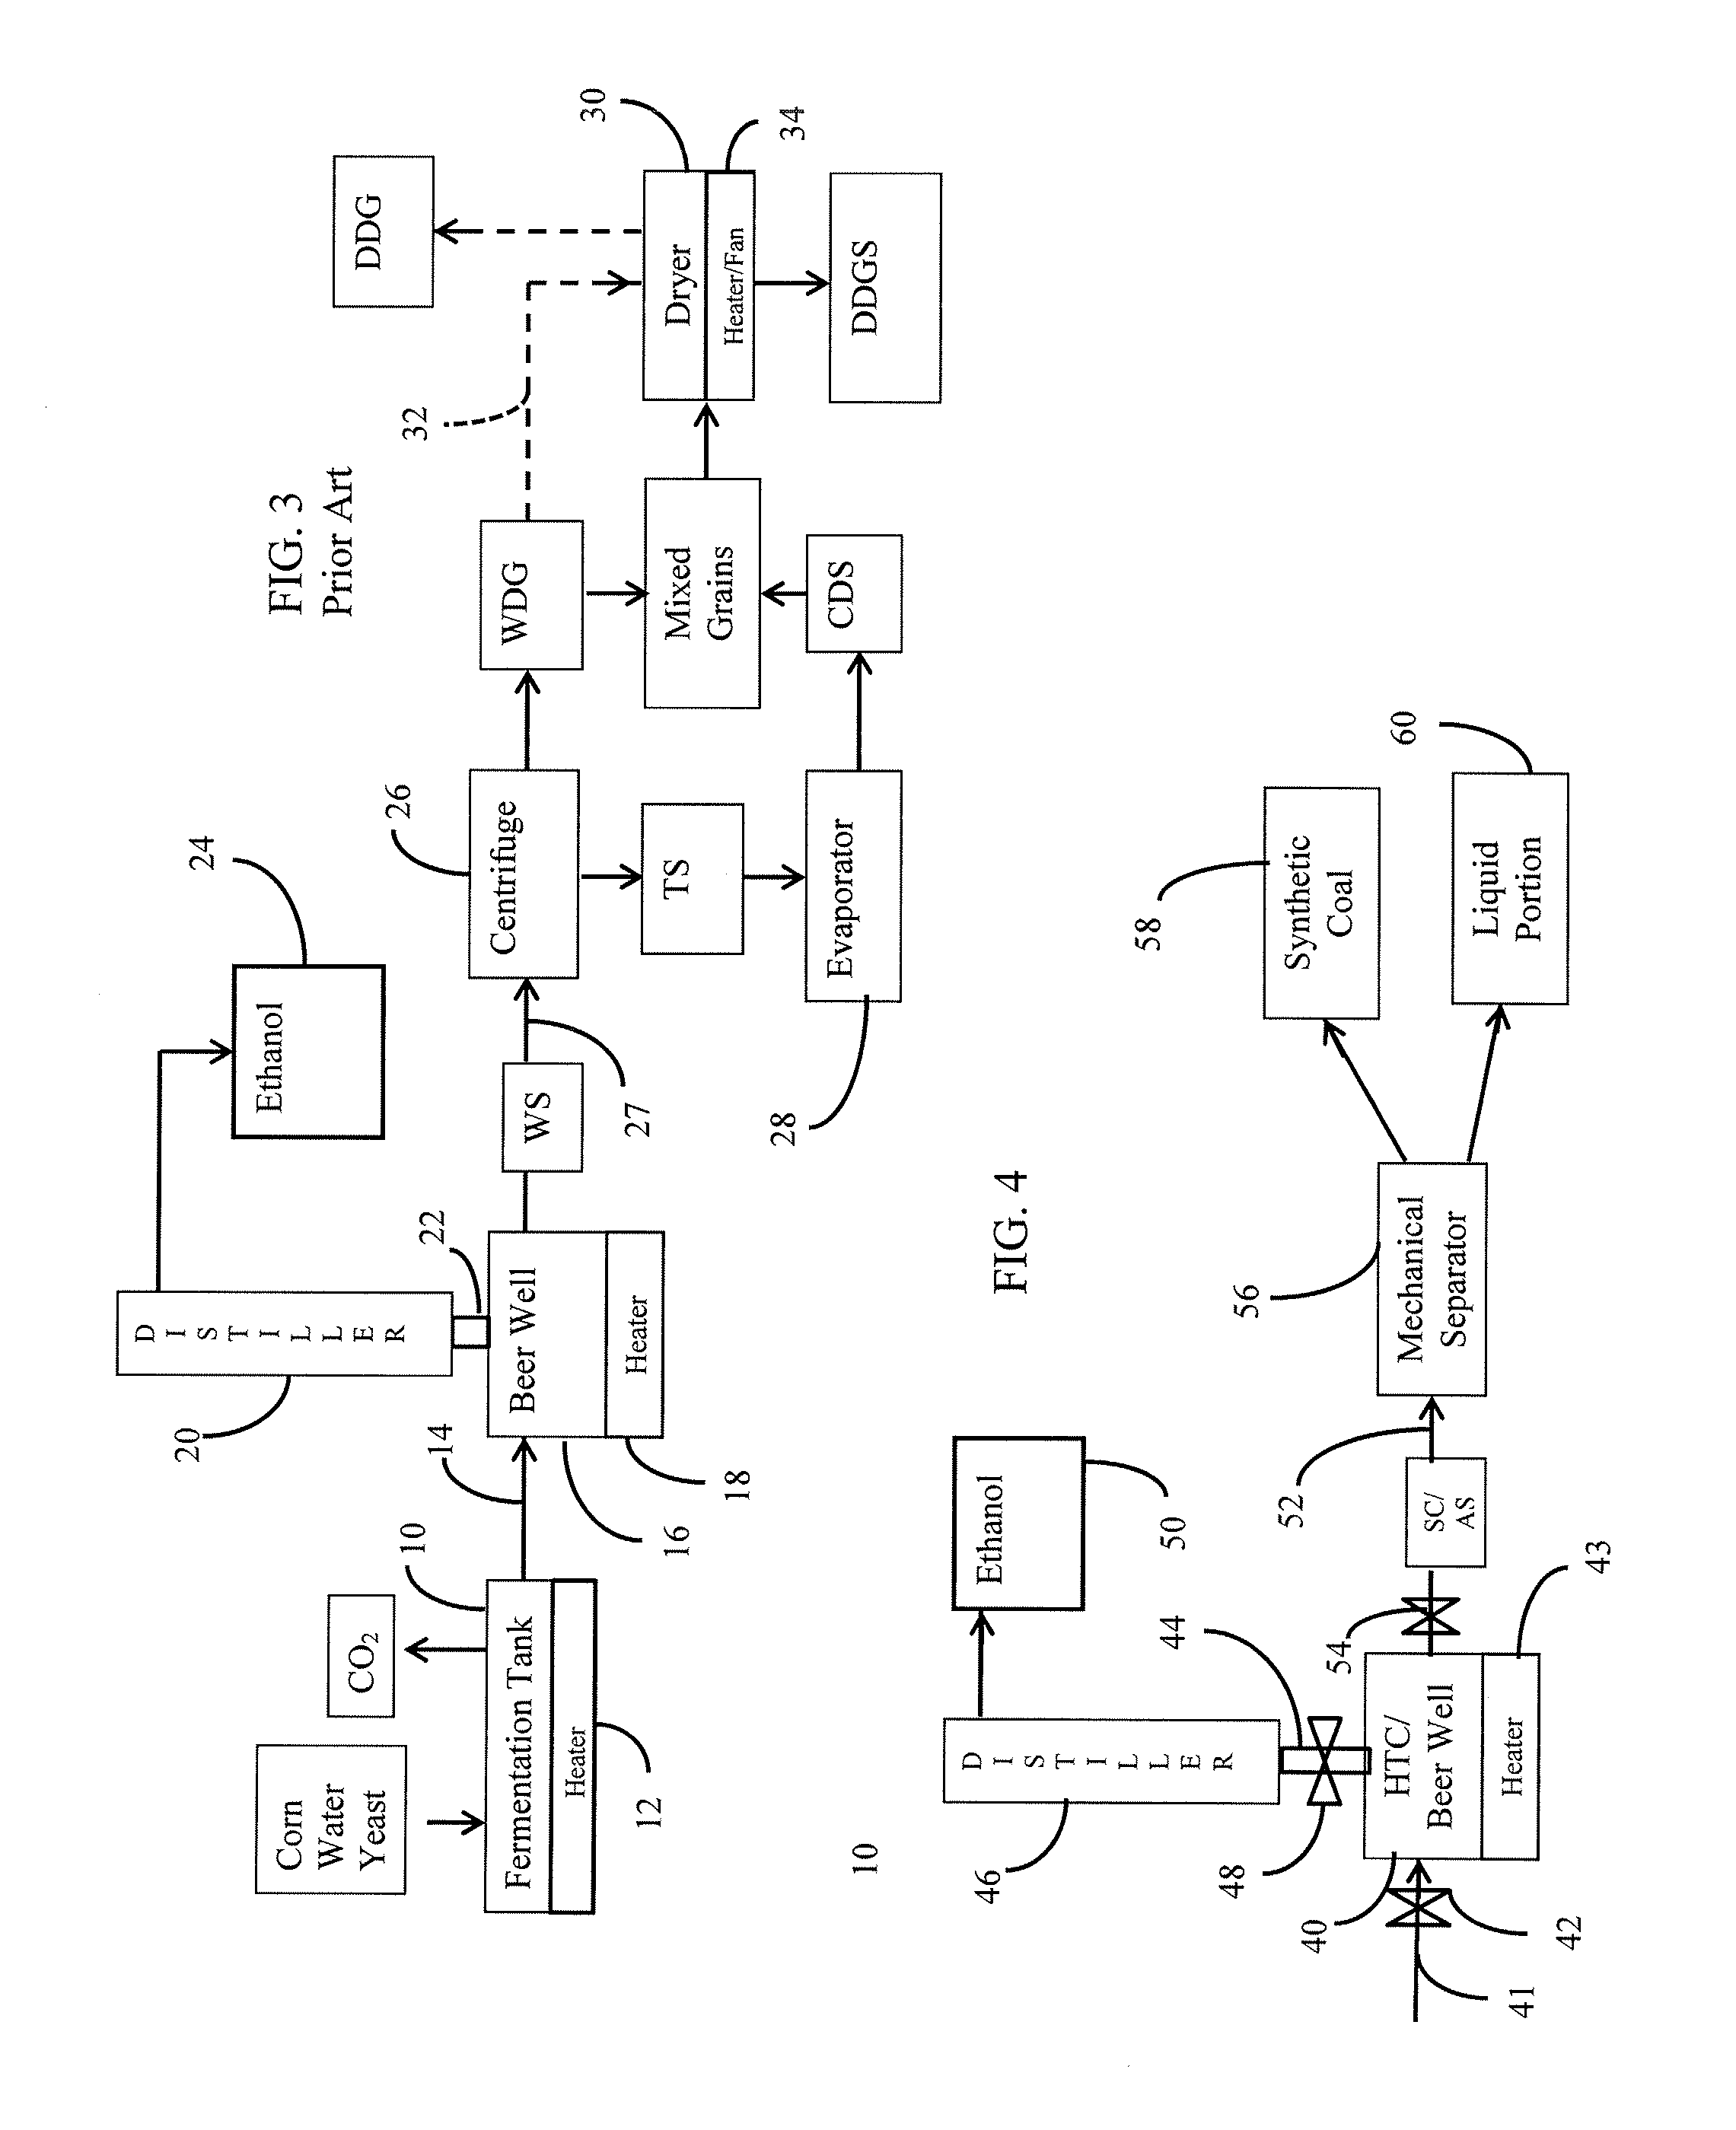 Methods of producing coal and fertilizers from fermentation residues